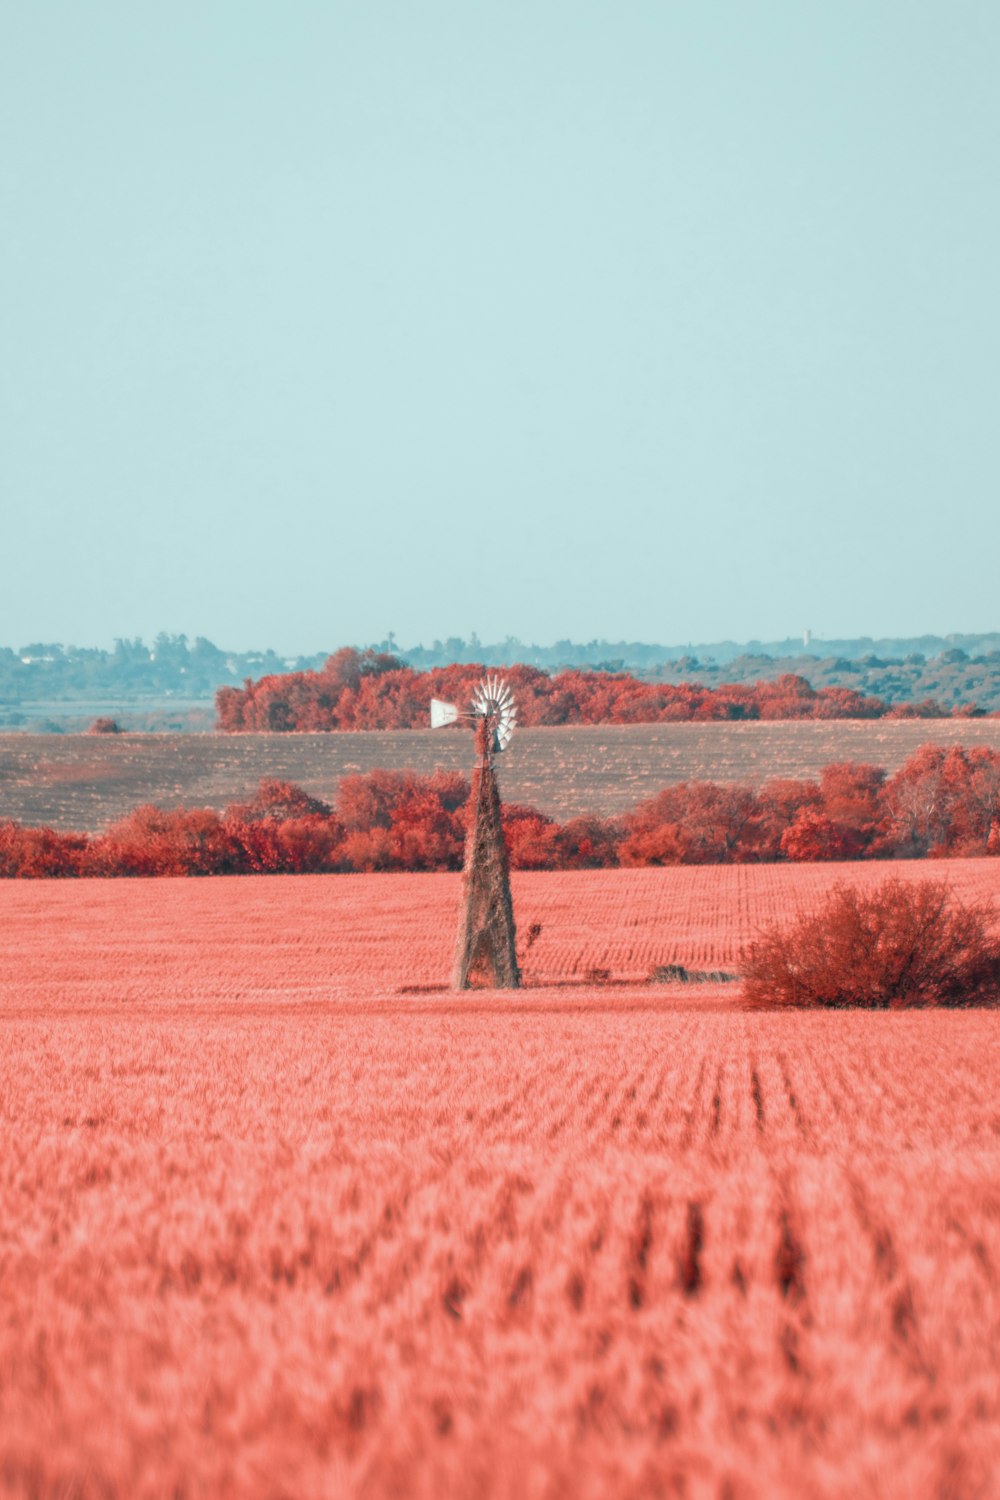 a windmill in the middle of a red field